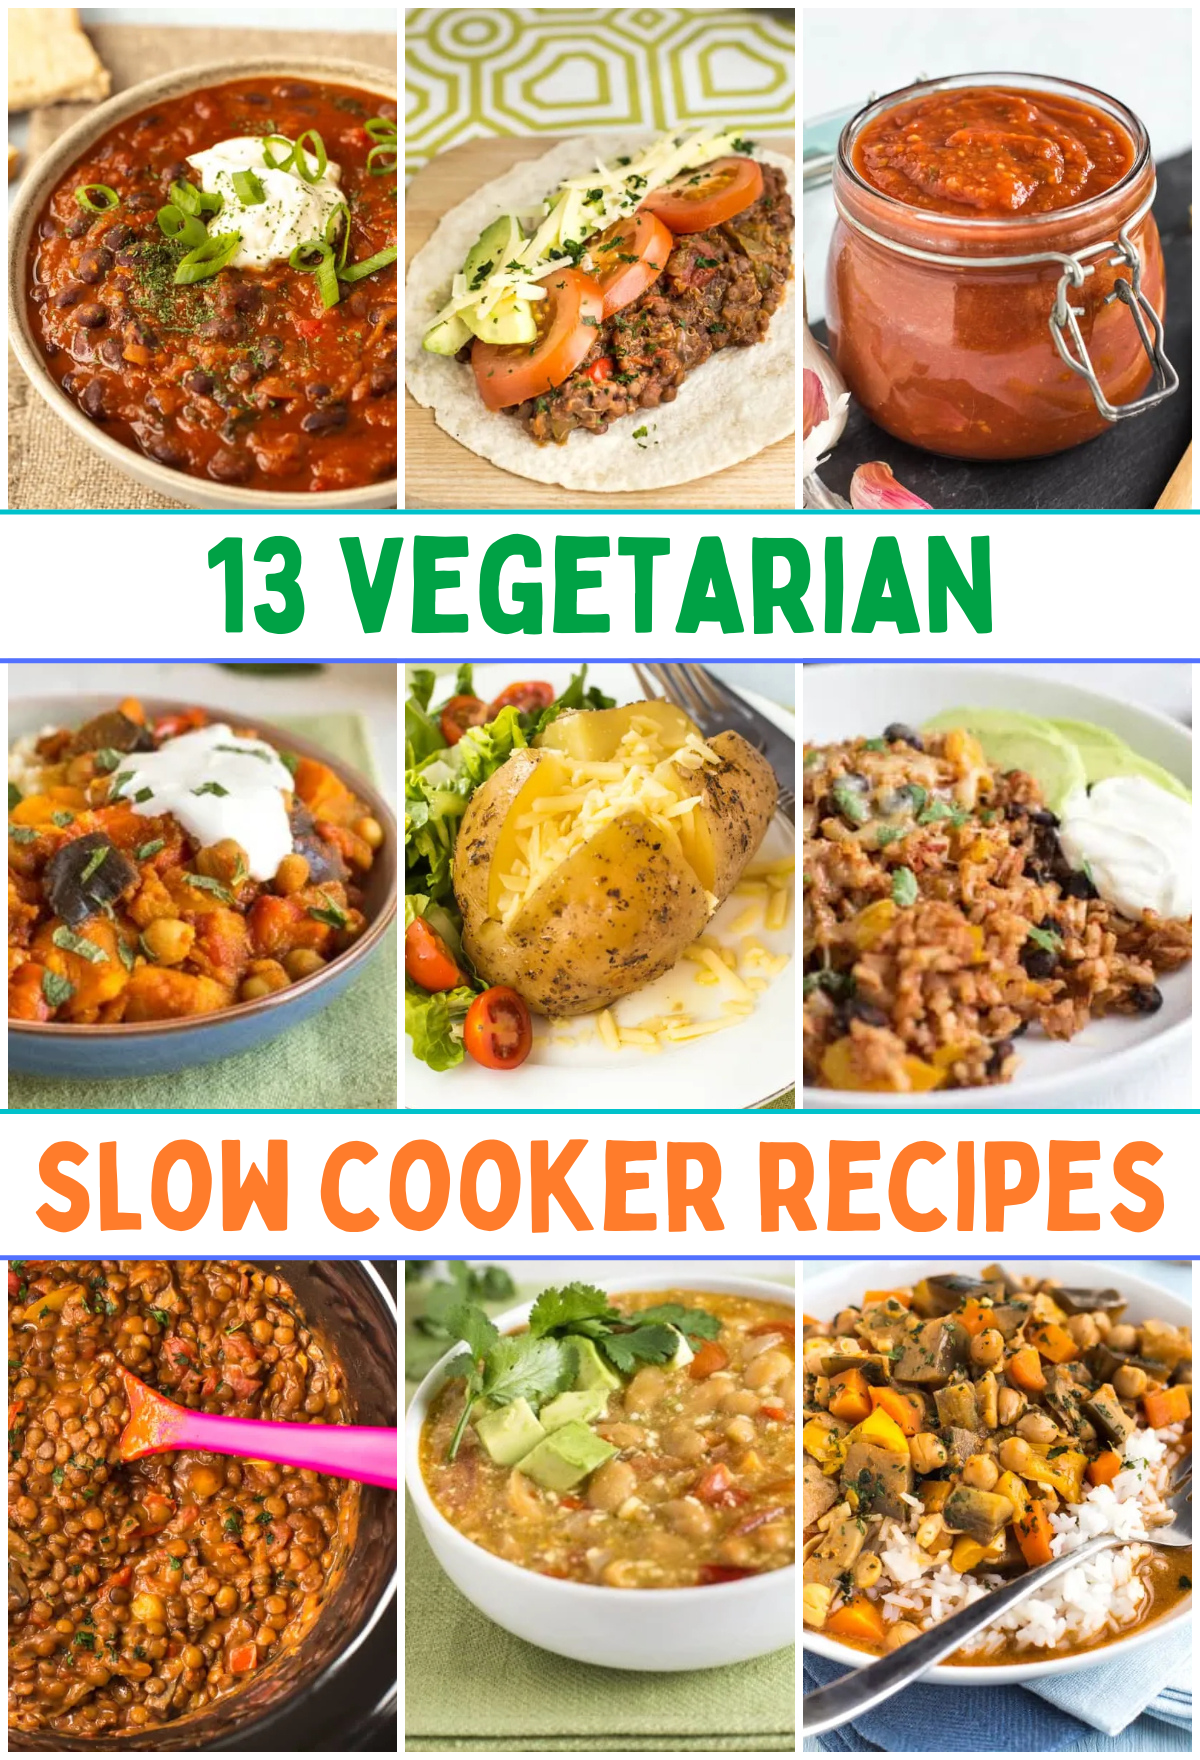 Collage showing 13 vegetarian slow cooker recipes.